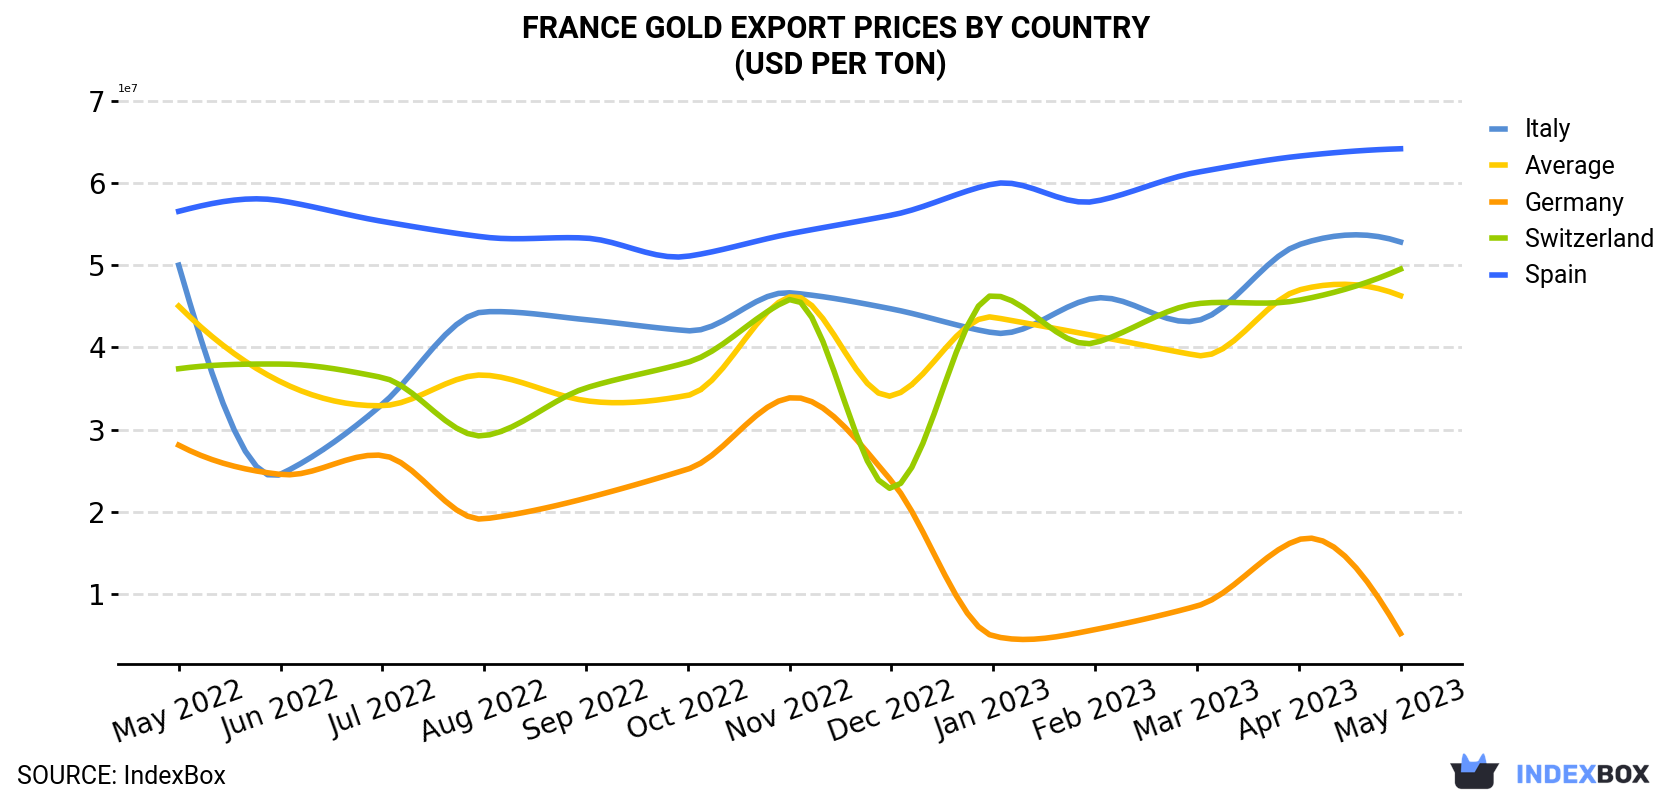 France Gold Export Prices By Country (USD Per Ton)